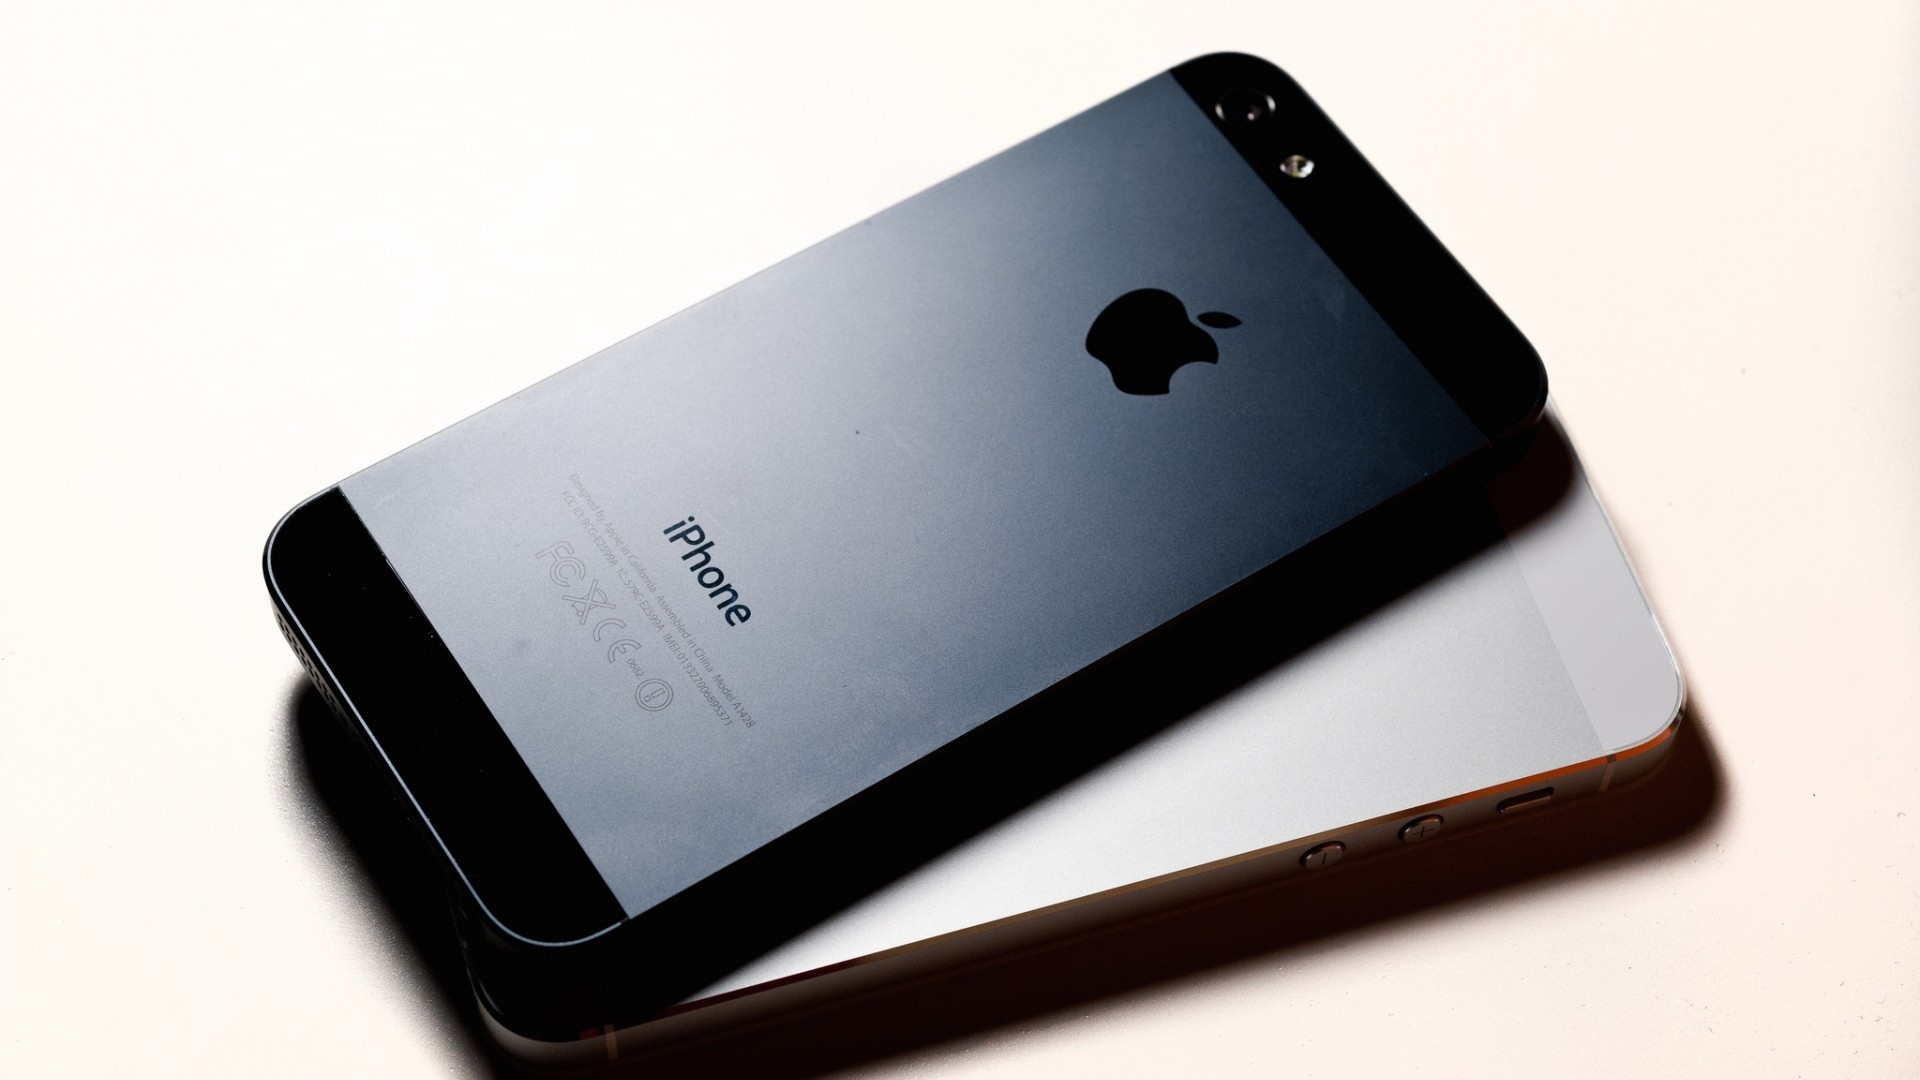 iPhone 5 Rear 1920 x 1080 HDTV 1080p Wallpapers | HD ...